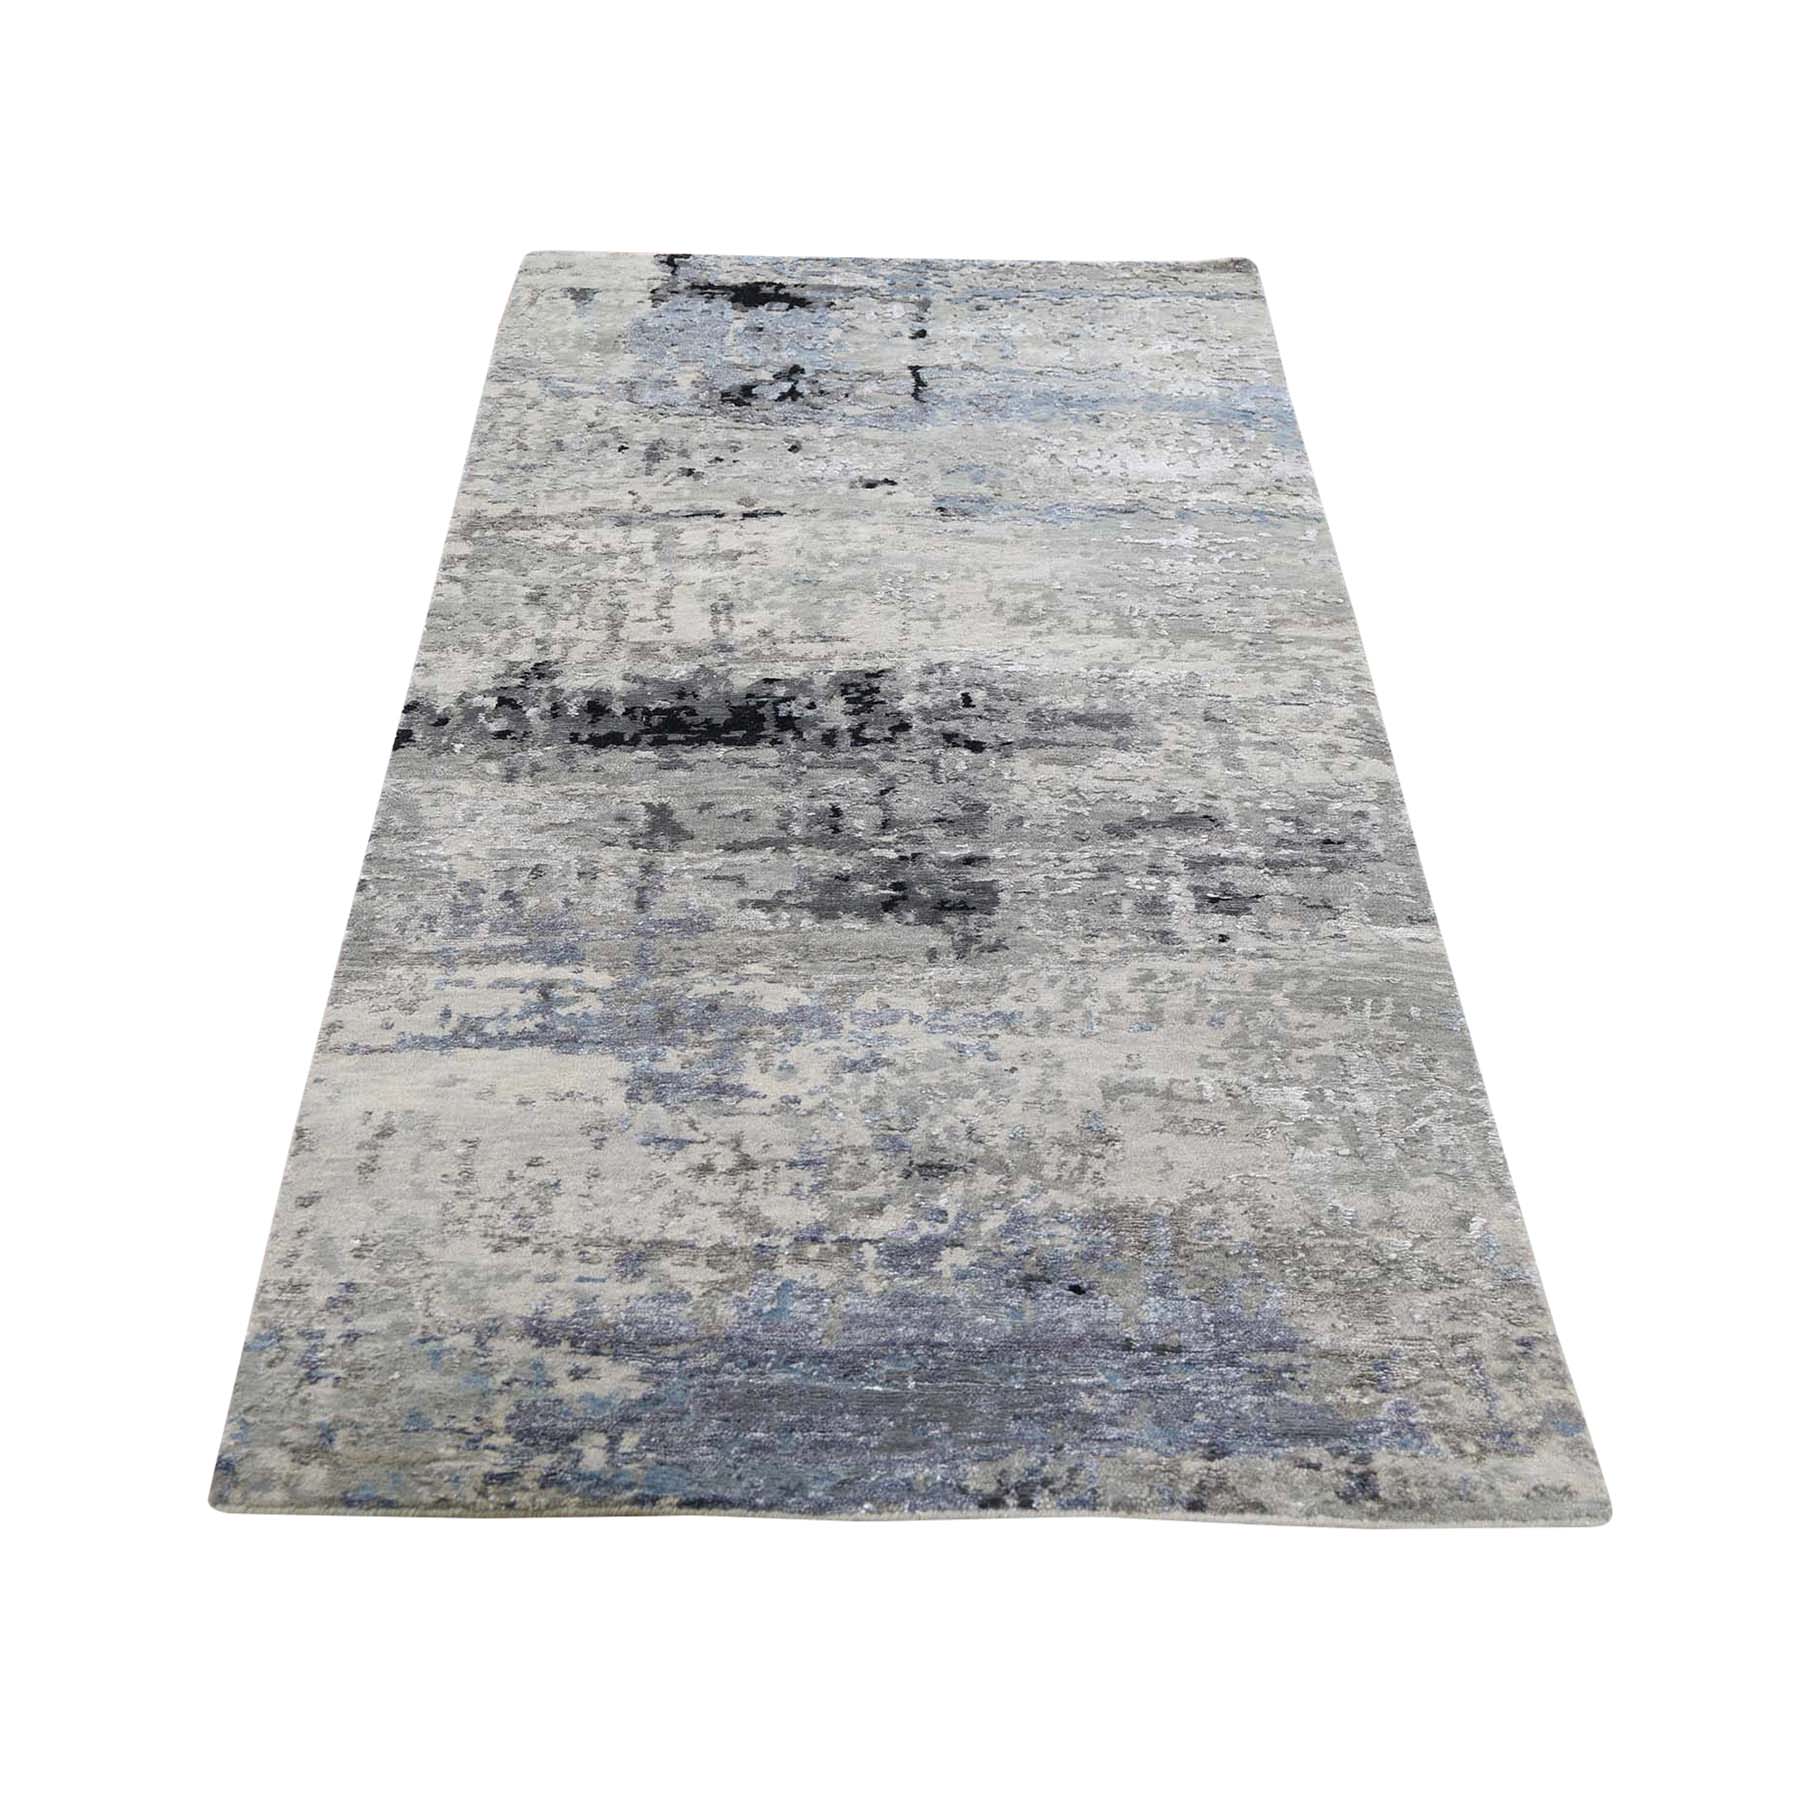 2'7"x5'9" Gray Hi low Pile Abstract Design Runner Wool And Silk Hand Woven Oriental Rug 